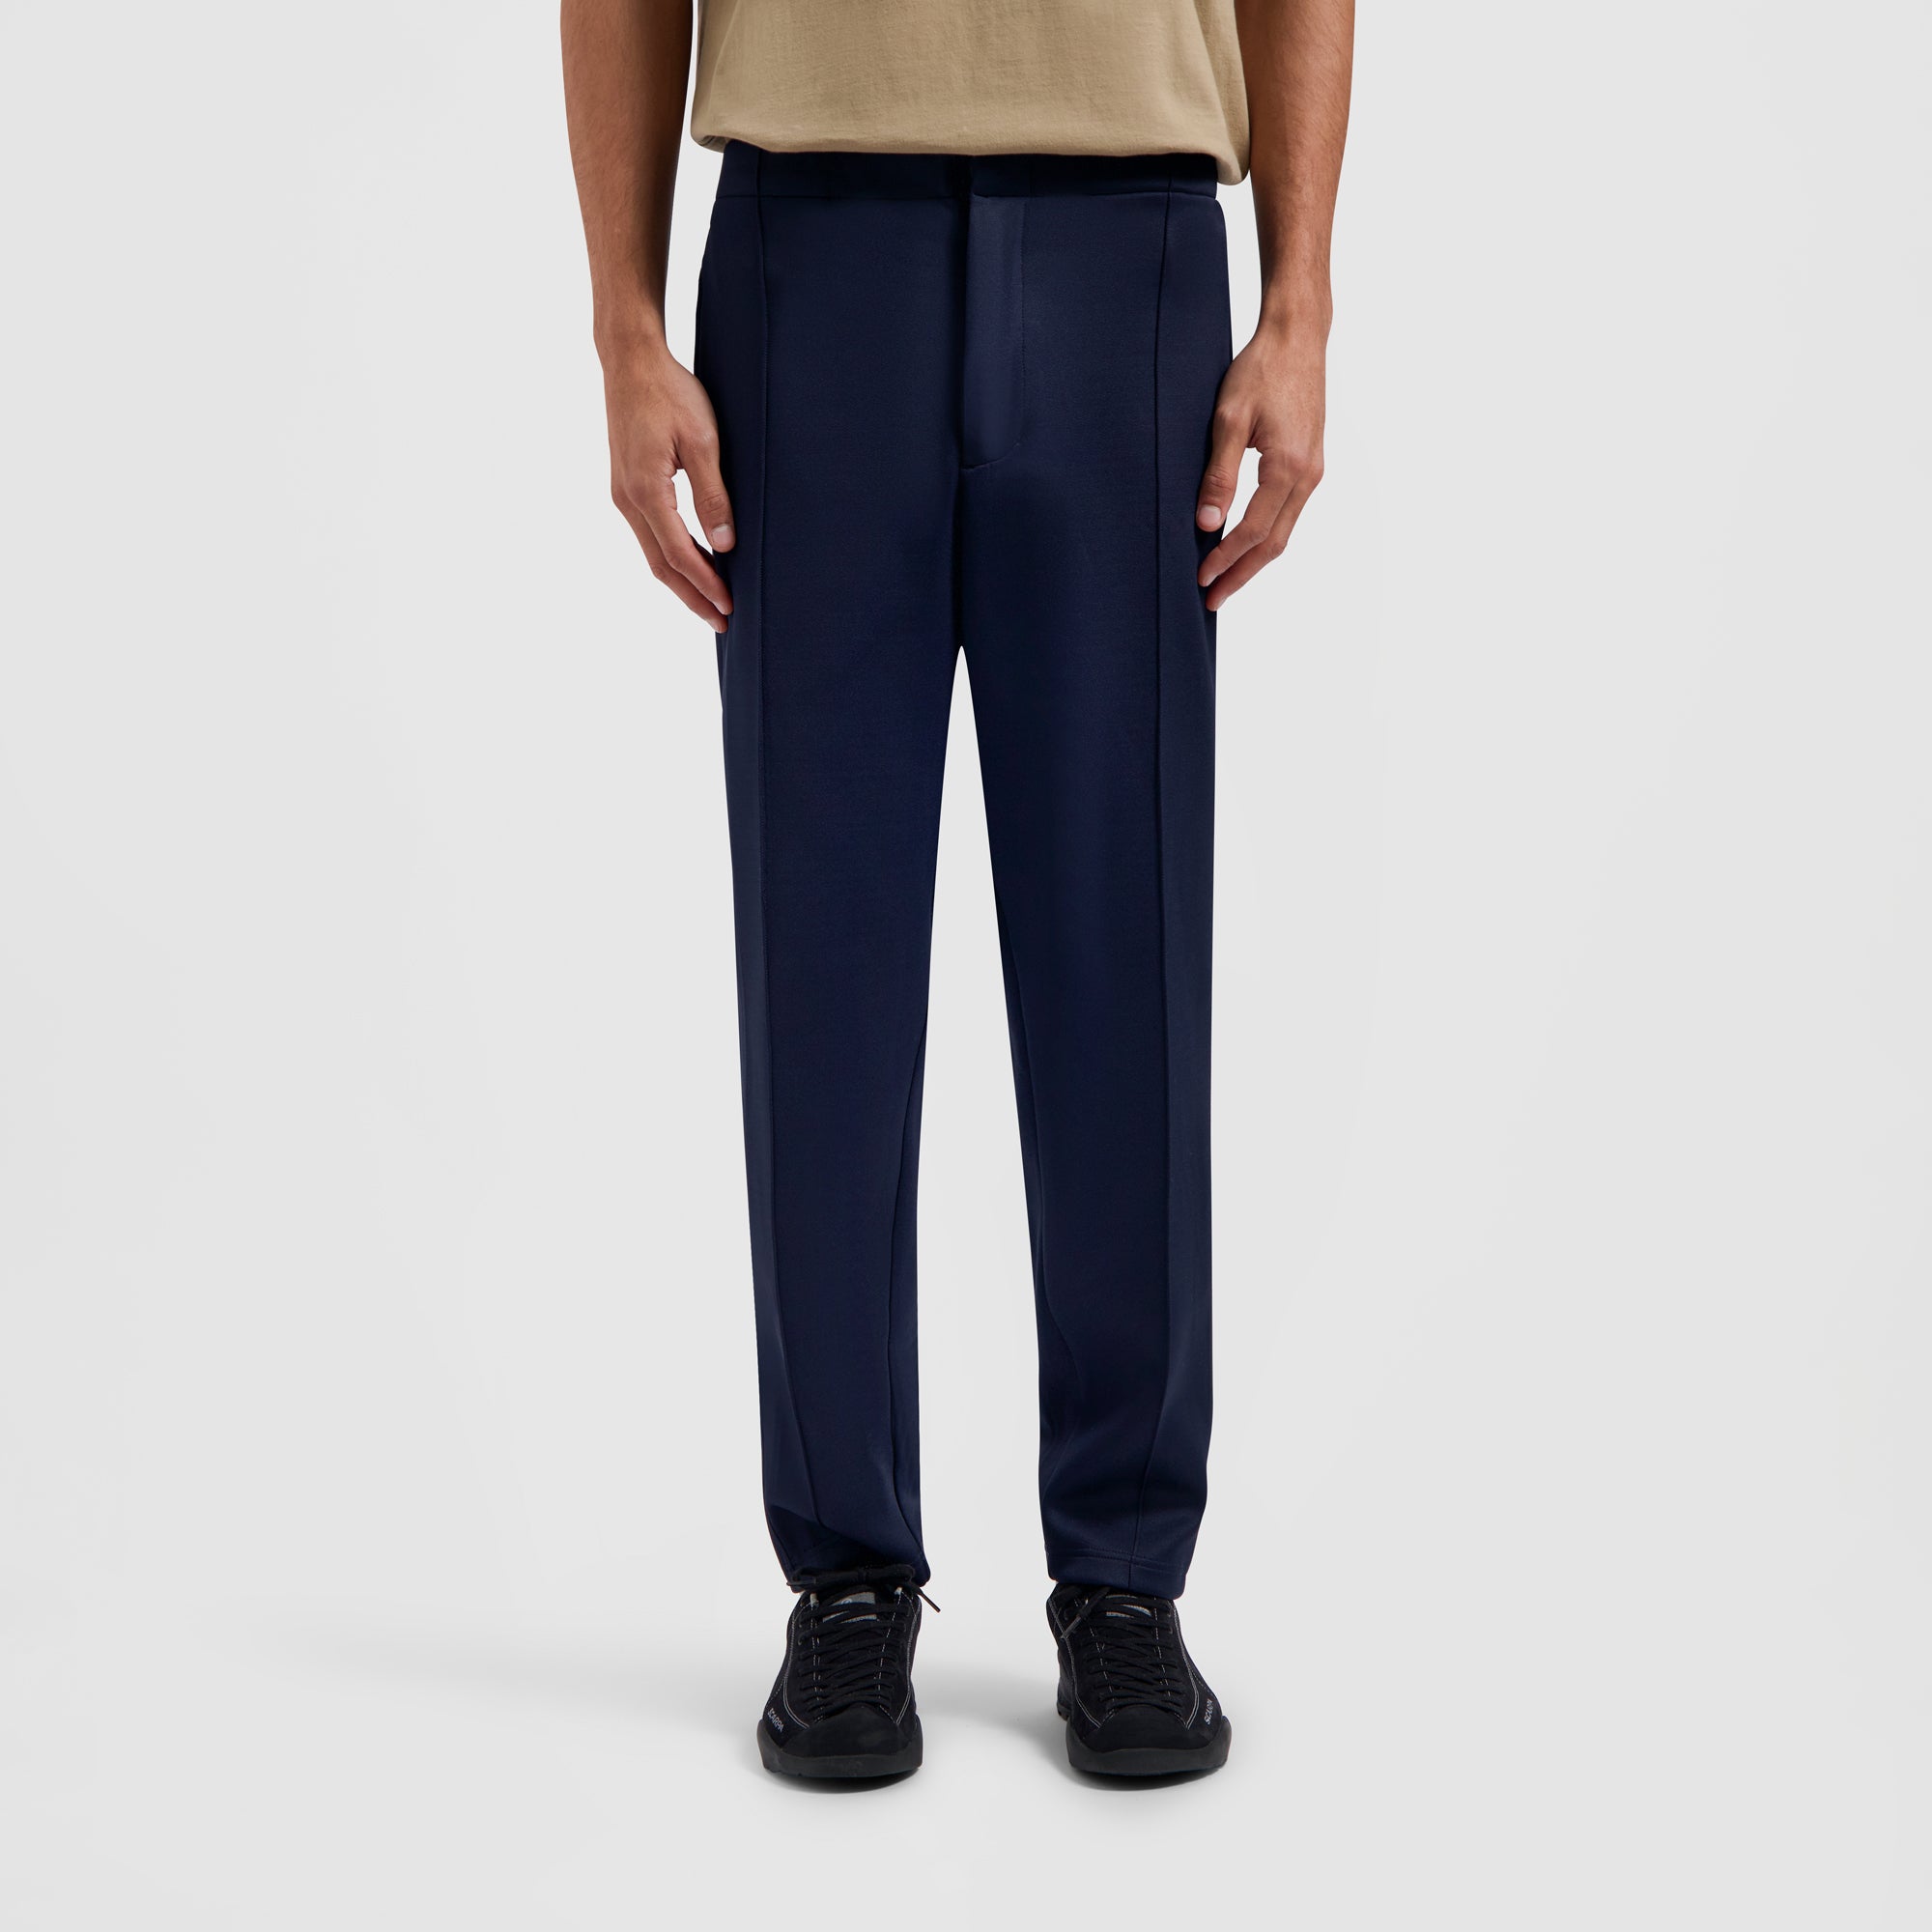 Pique Trousers - Navy